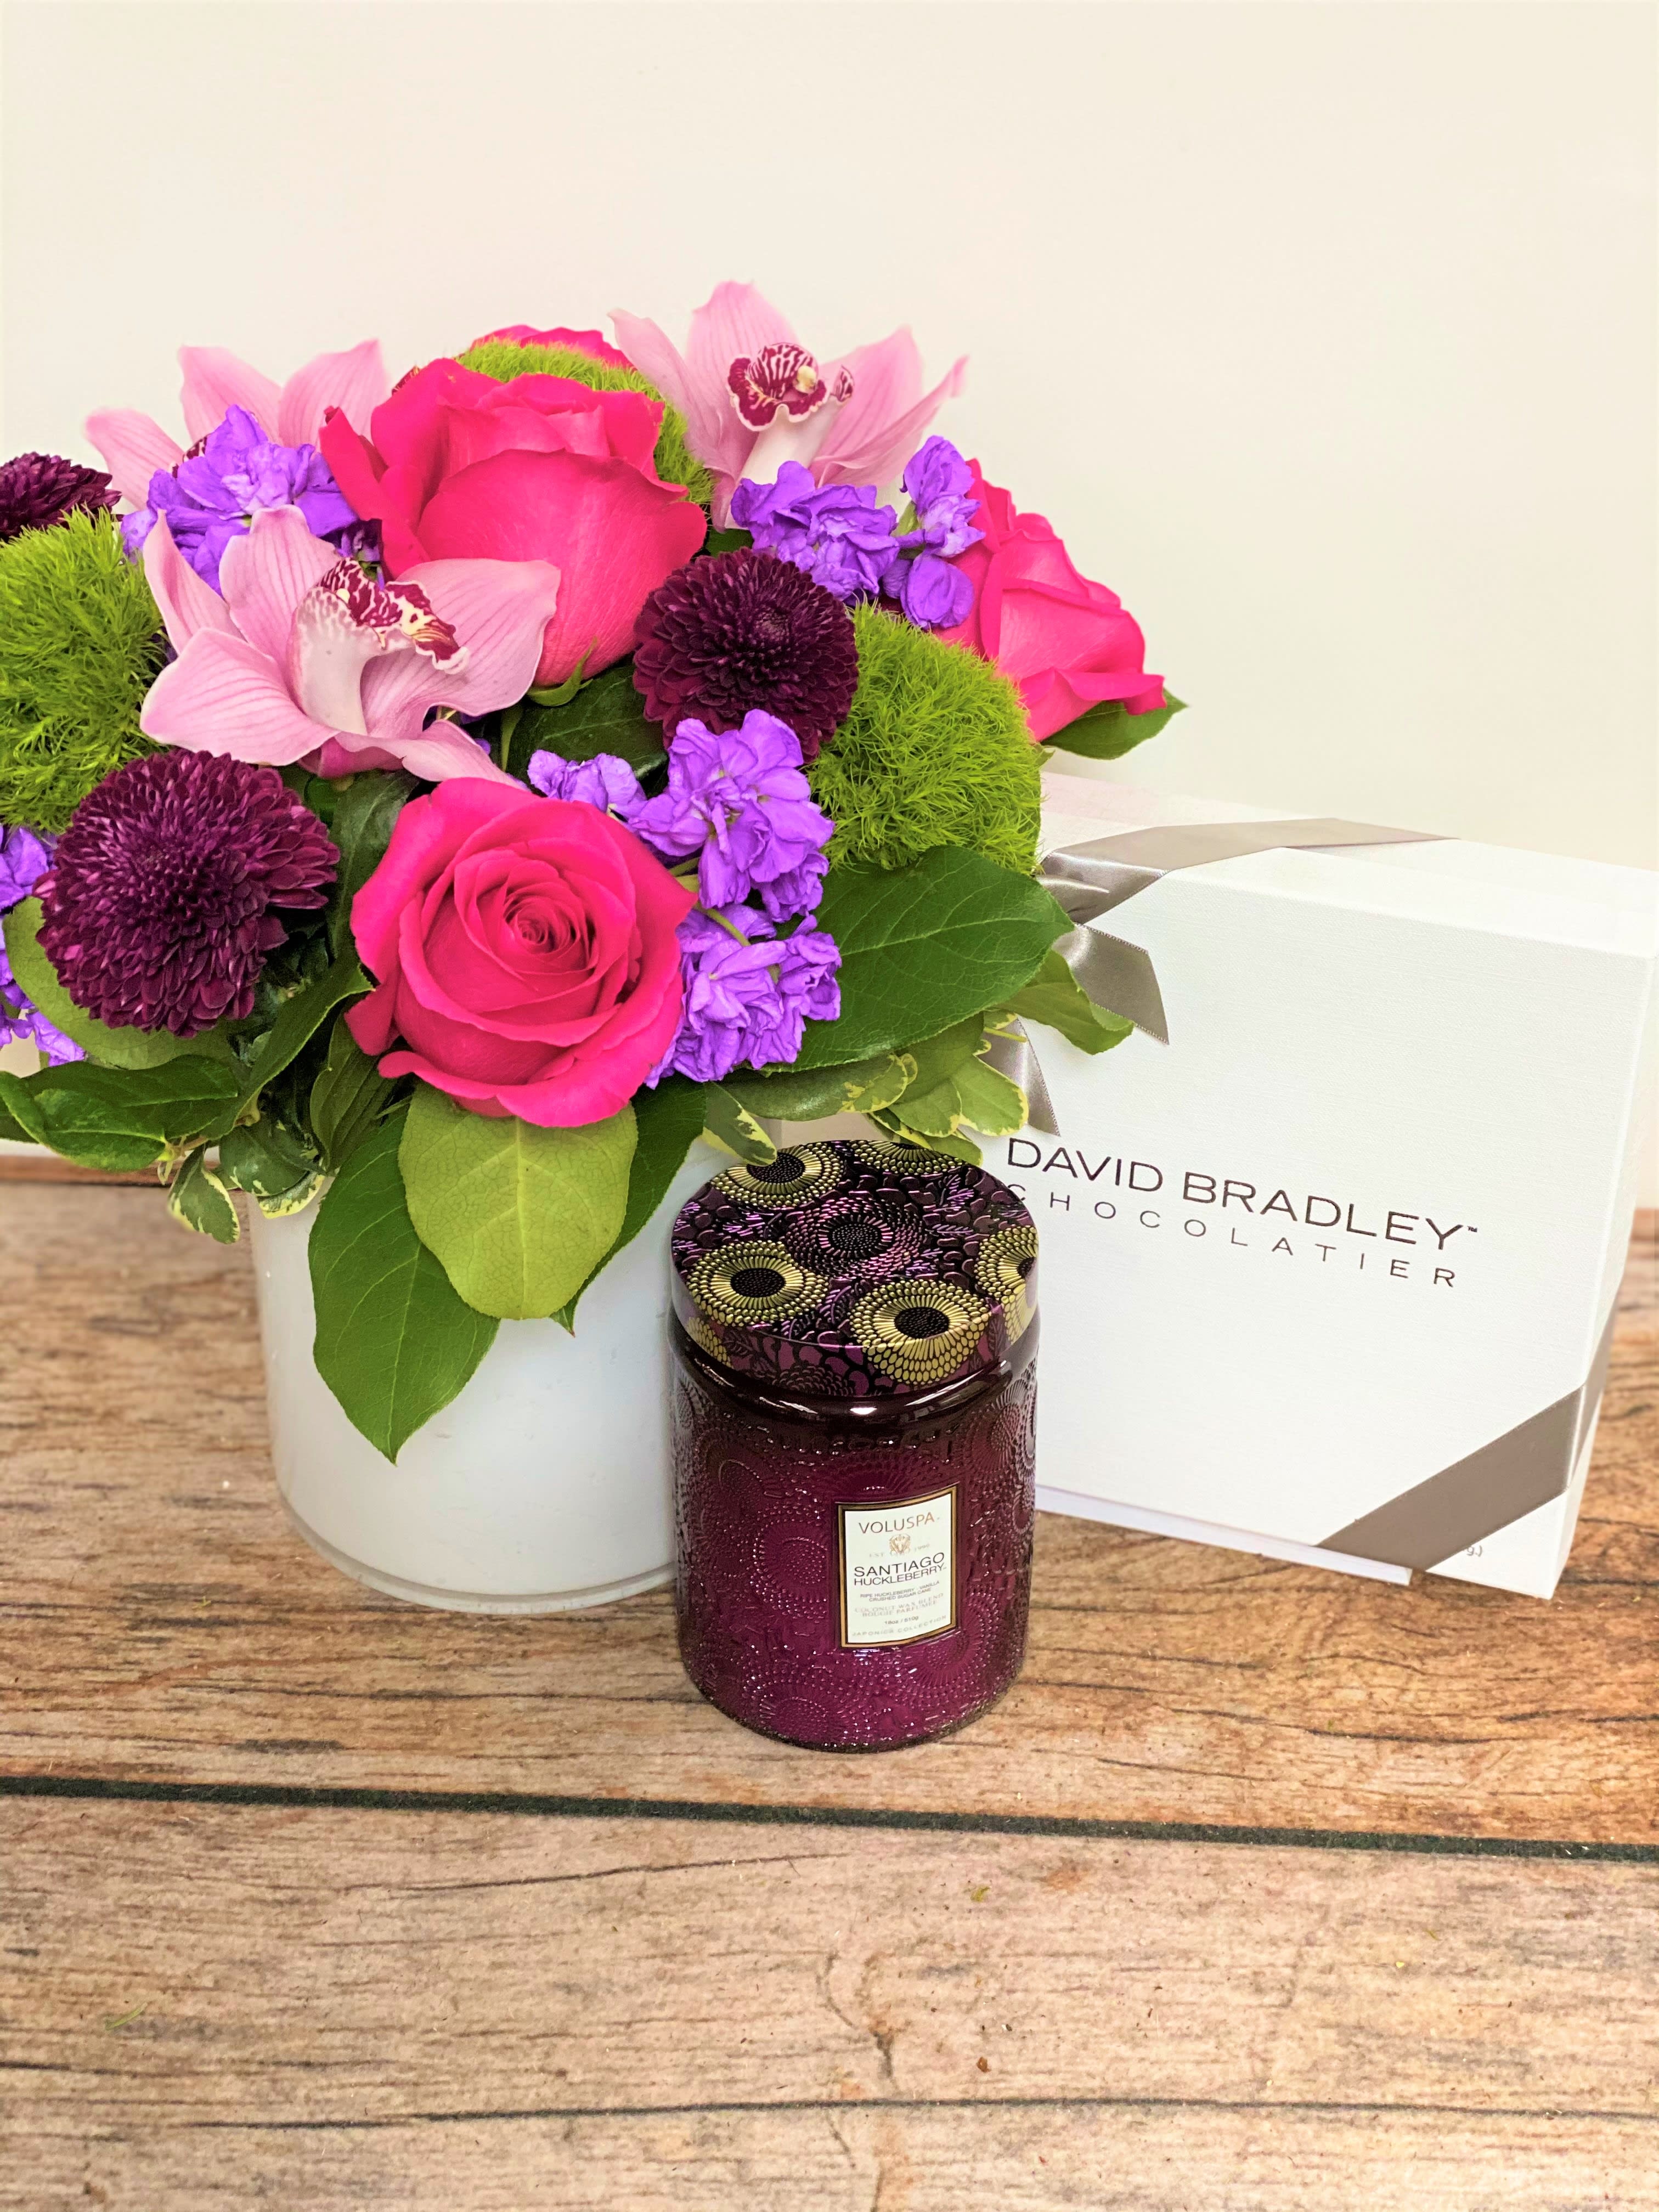 Complete Package - All packaged and ready to go! A full, mixed floral arrangement accompanied by a Voluspa candle and one pound box of mixed David Bradley Chocolates. Everything your Valentine needs and wants!